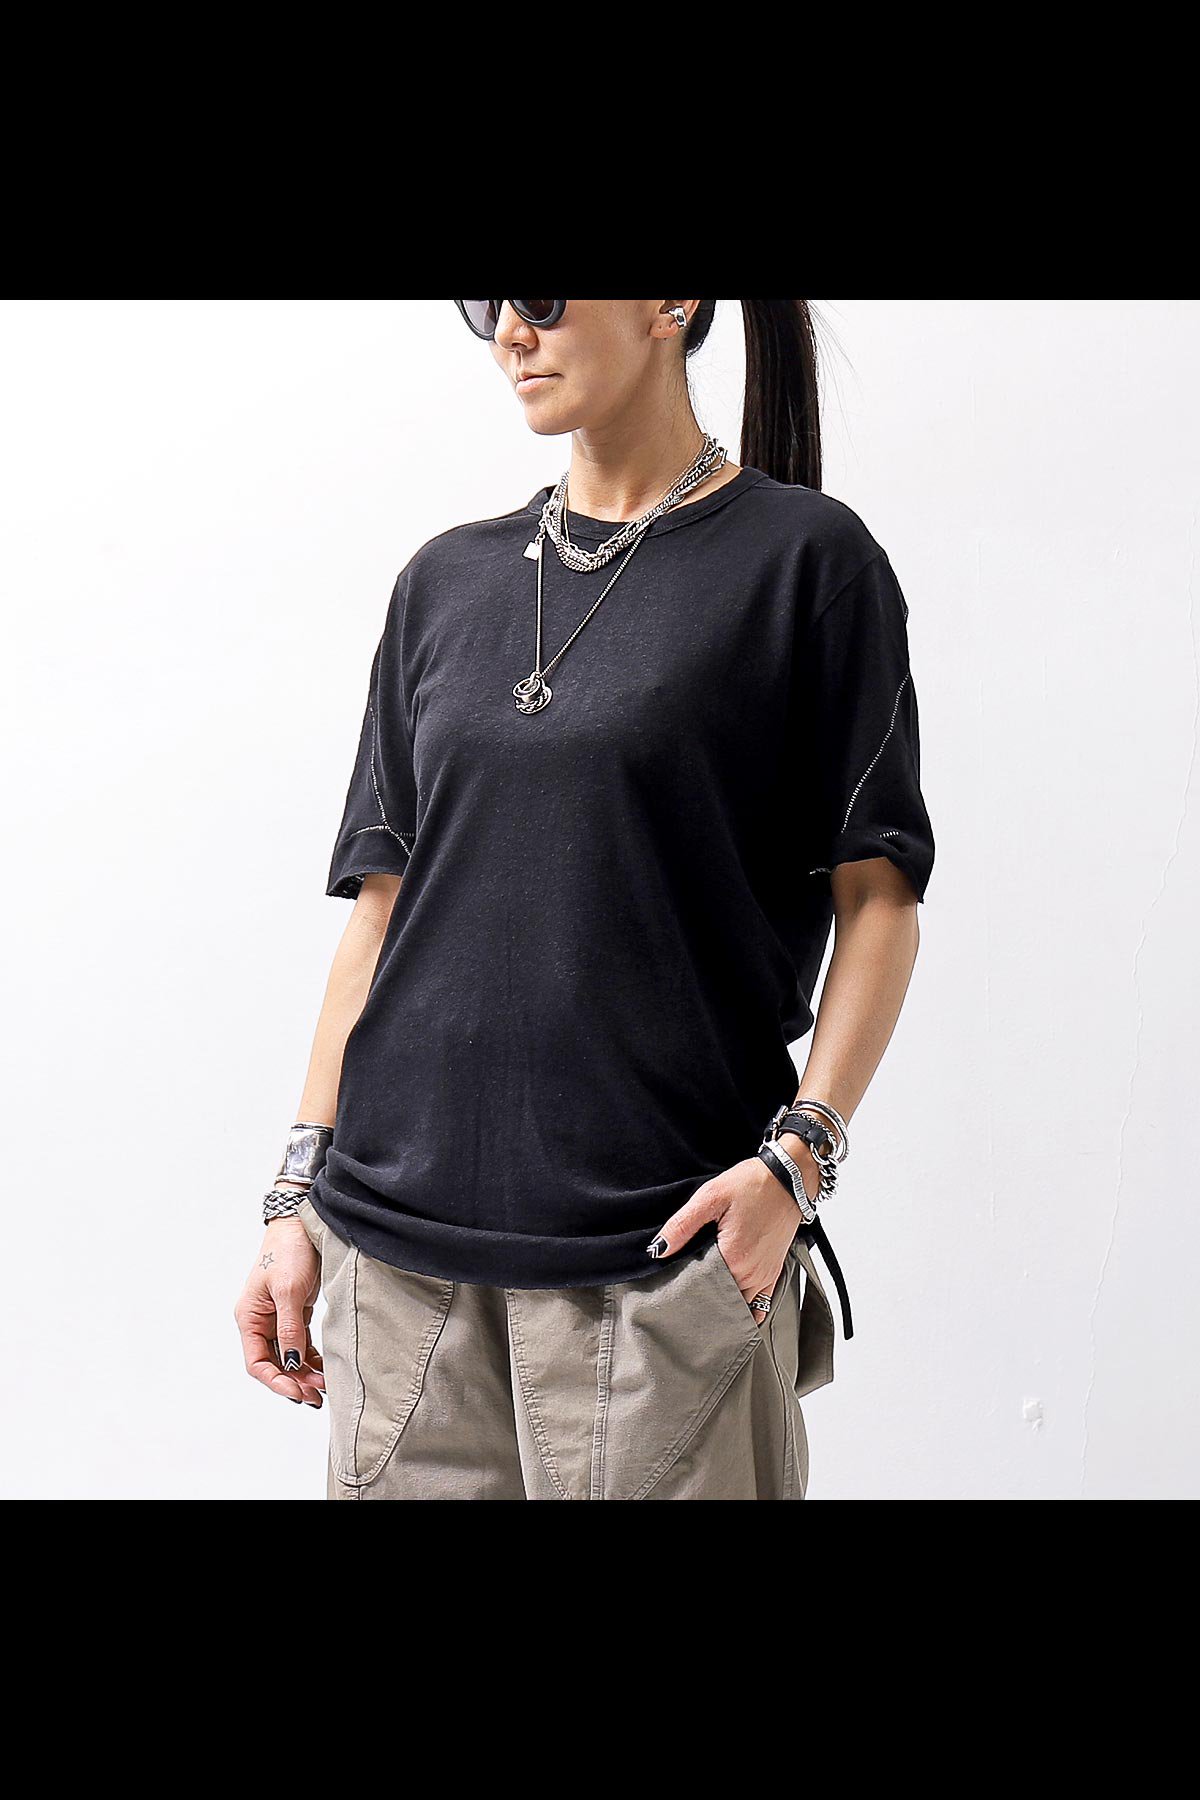 <img class='new_mark_img1' src='https://img.shop-pro.jp/img/new/icons8.gif' style='border:none;display:inline;margin:0px;padding:0px;width:auto;' />UNISEX COTTON LINEN T-SHIRT MTS779_BLACK